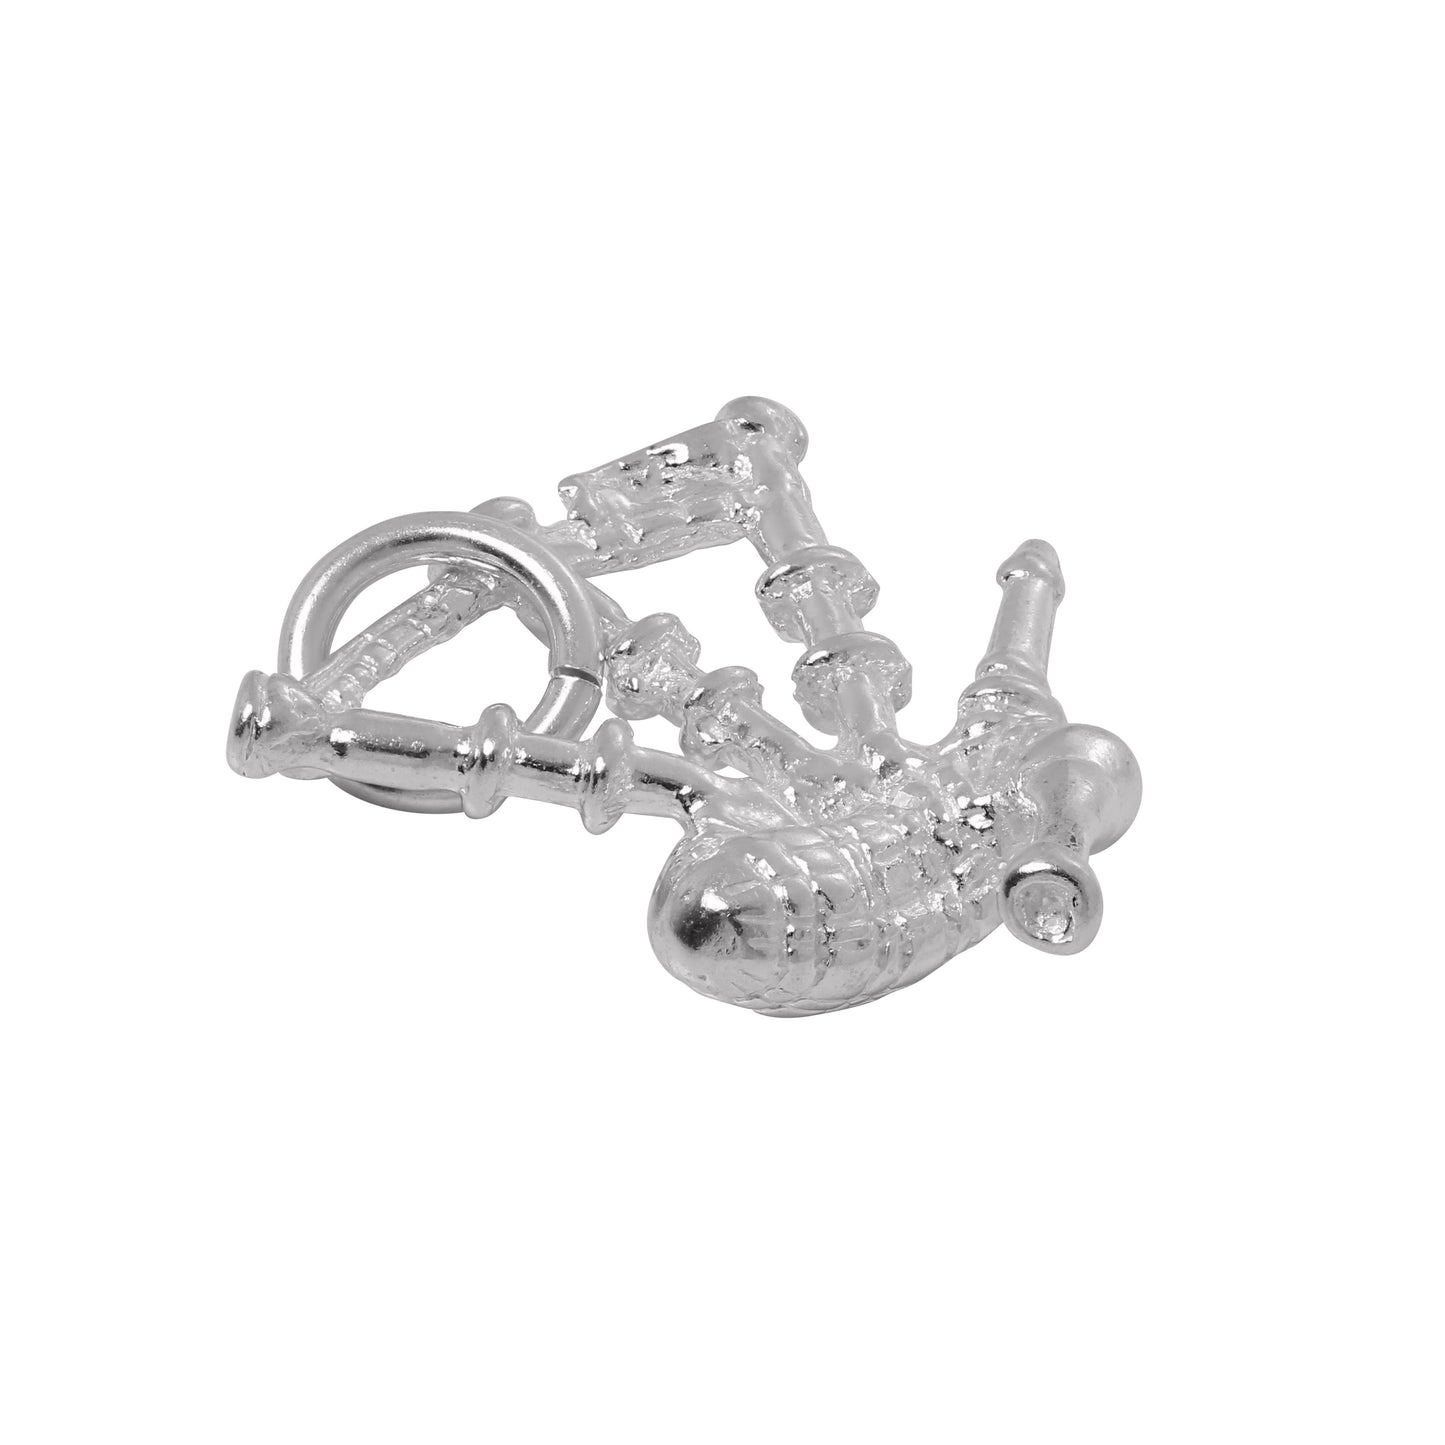 Silver Scottish Bagpipes Charm